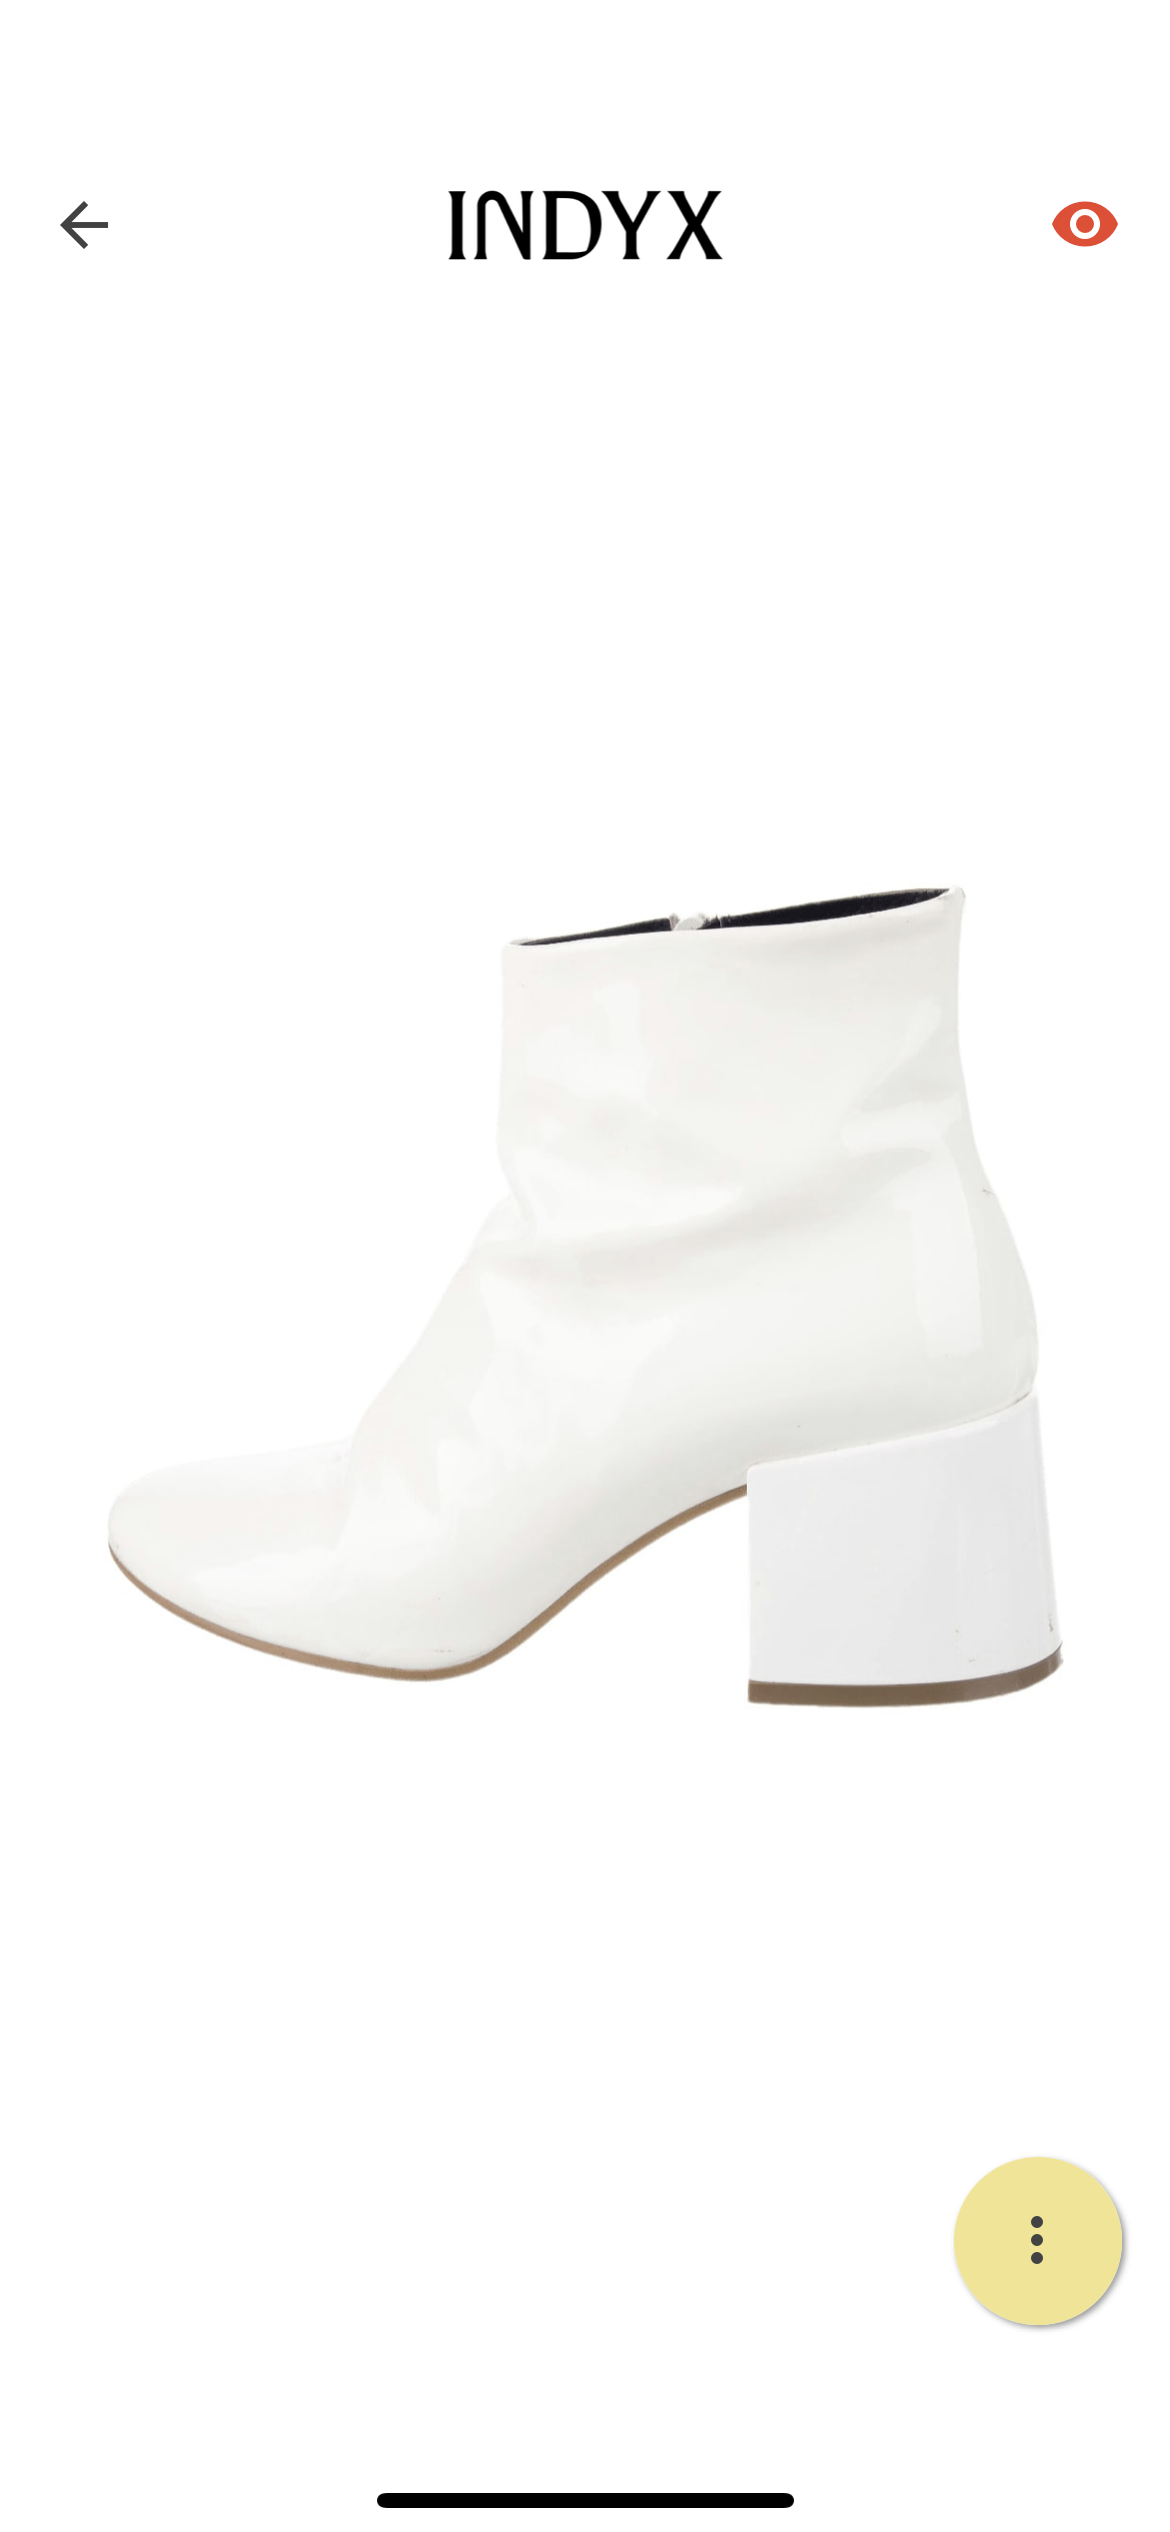 White boot that I'd like to make private